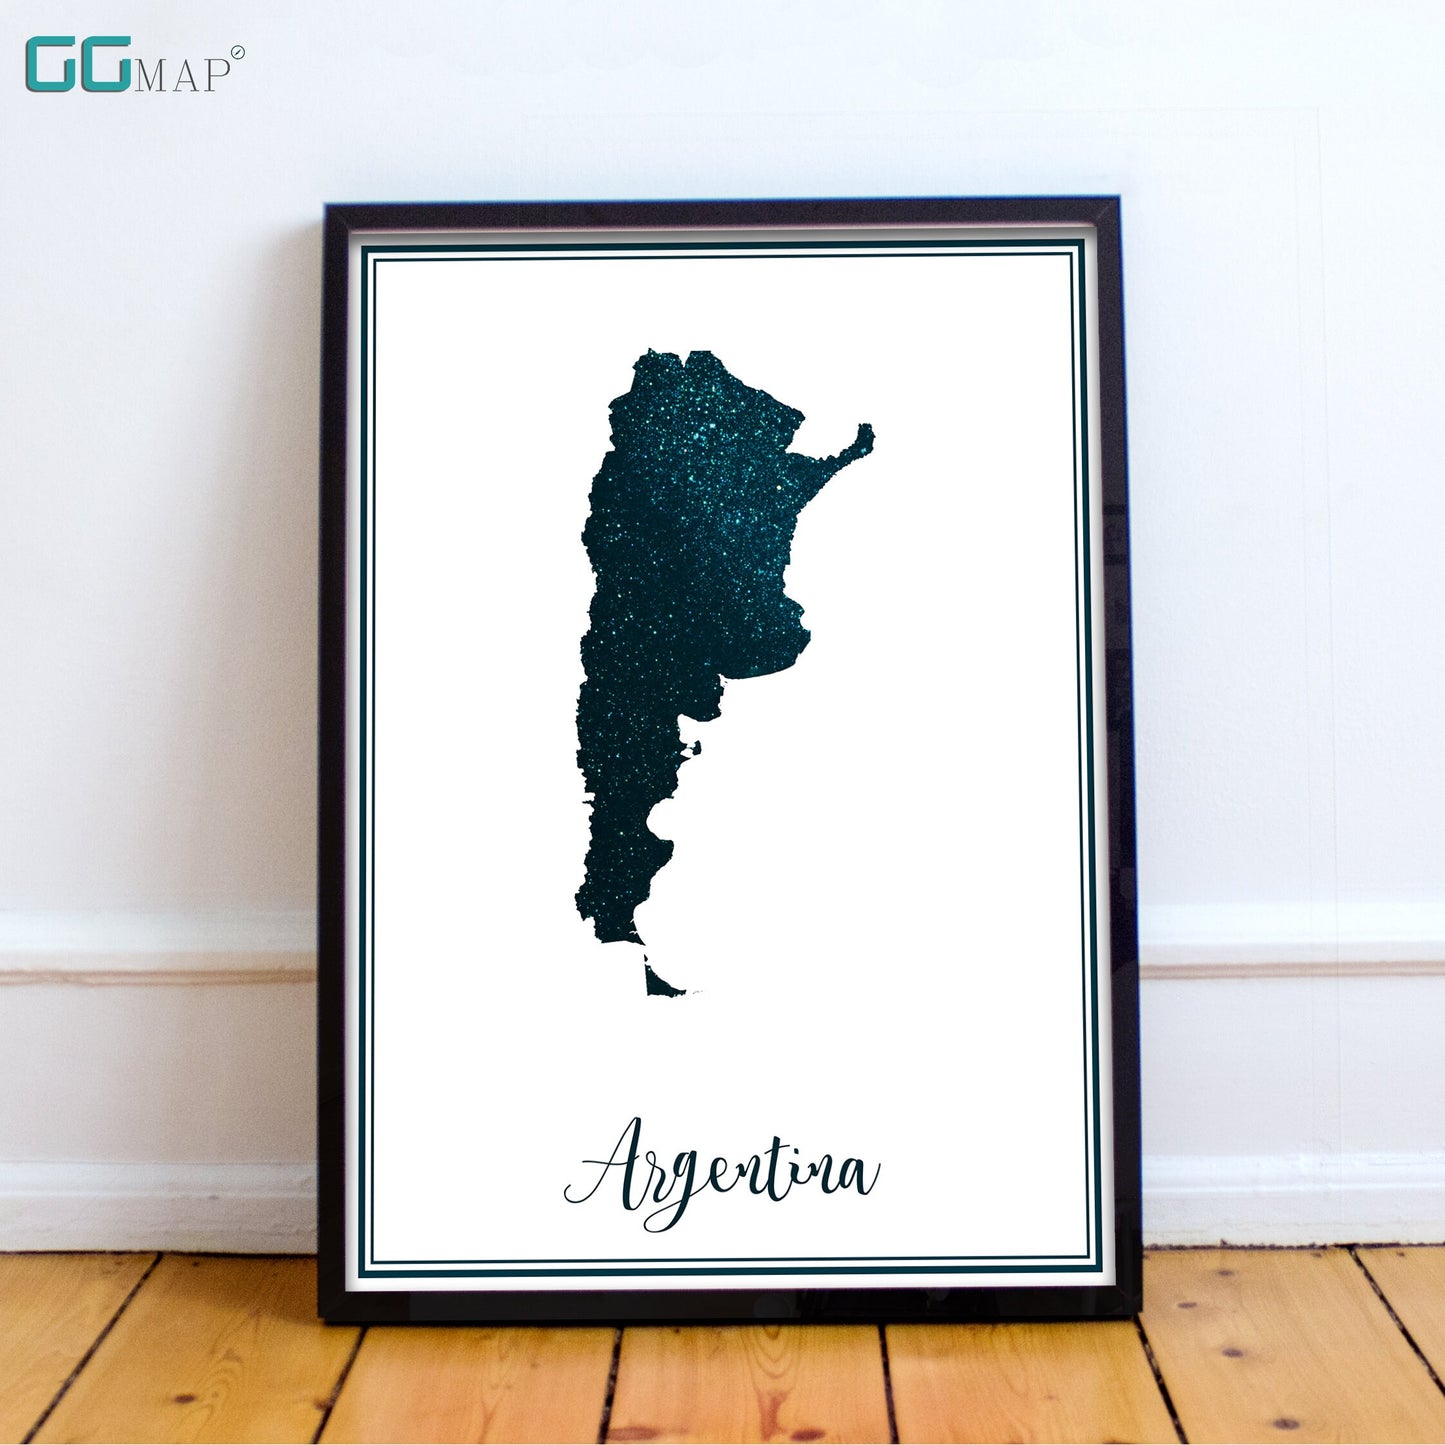 ARGENTINA map - Argentina stars map - Argentina Travel poster - Home Decor - Wall decor - Office map - Argentina gift - GeoGIS studio